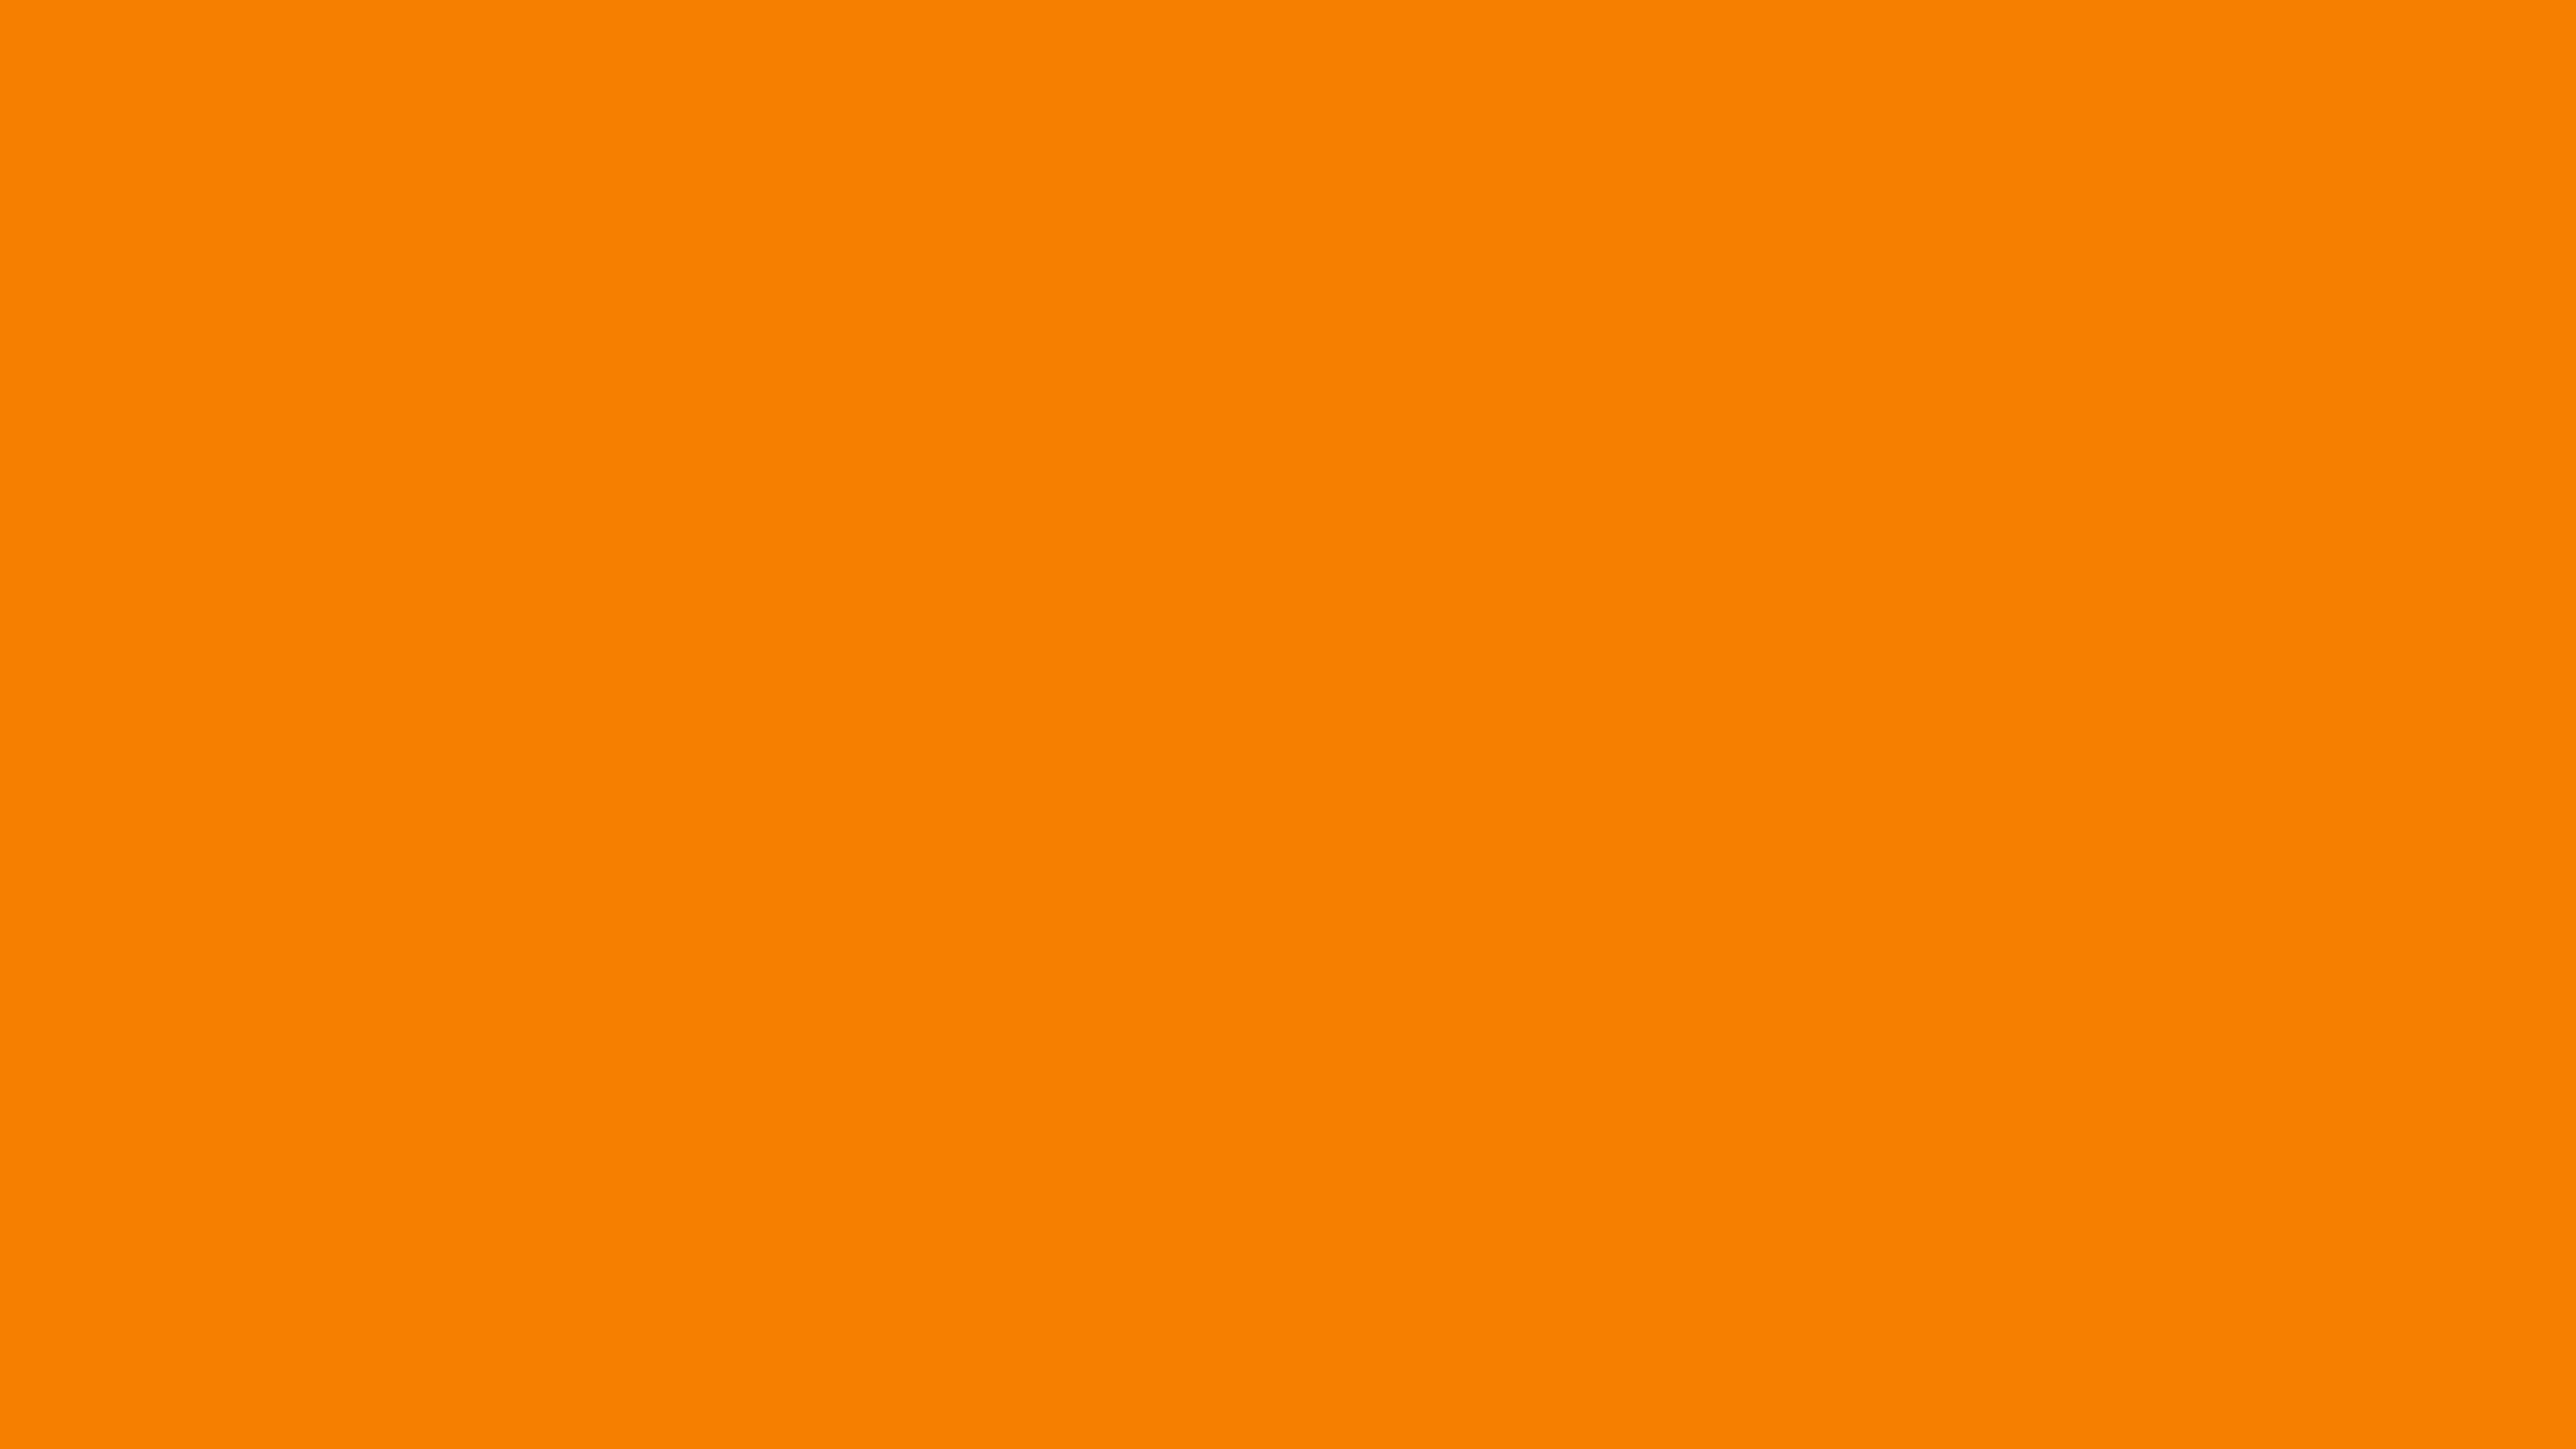 7680x4320 University Of Tennessee Orange Solid Color Background